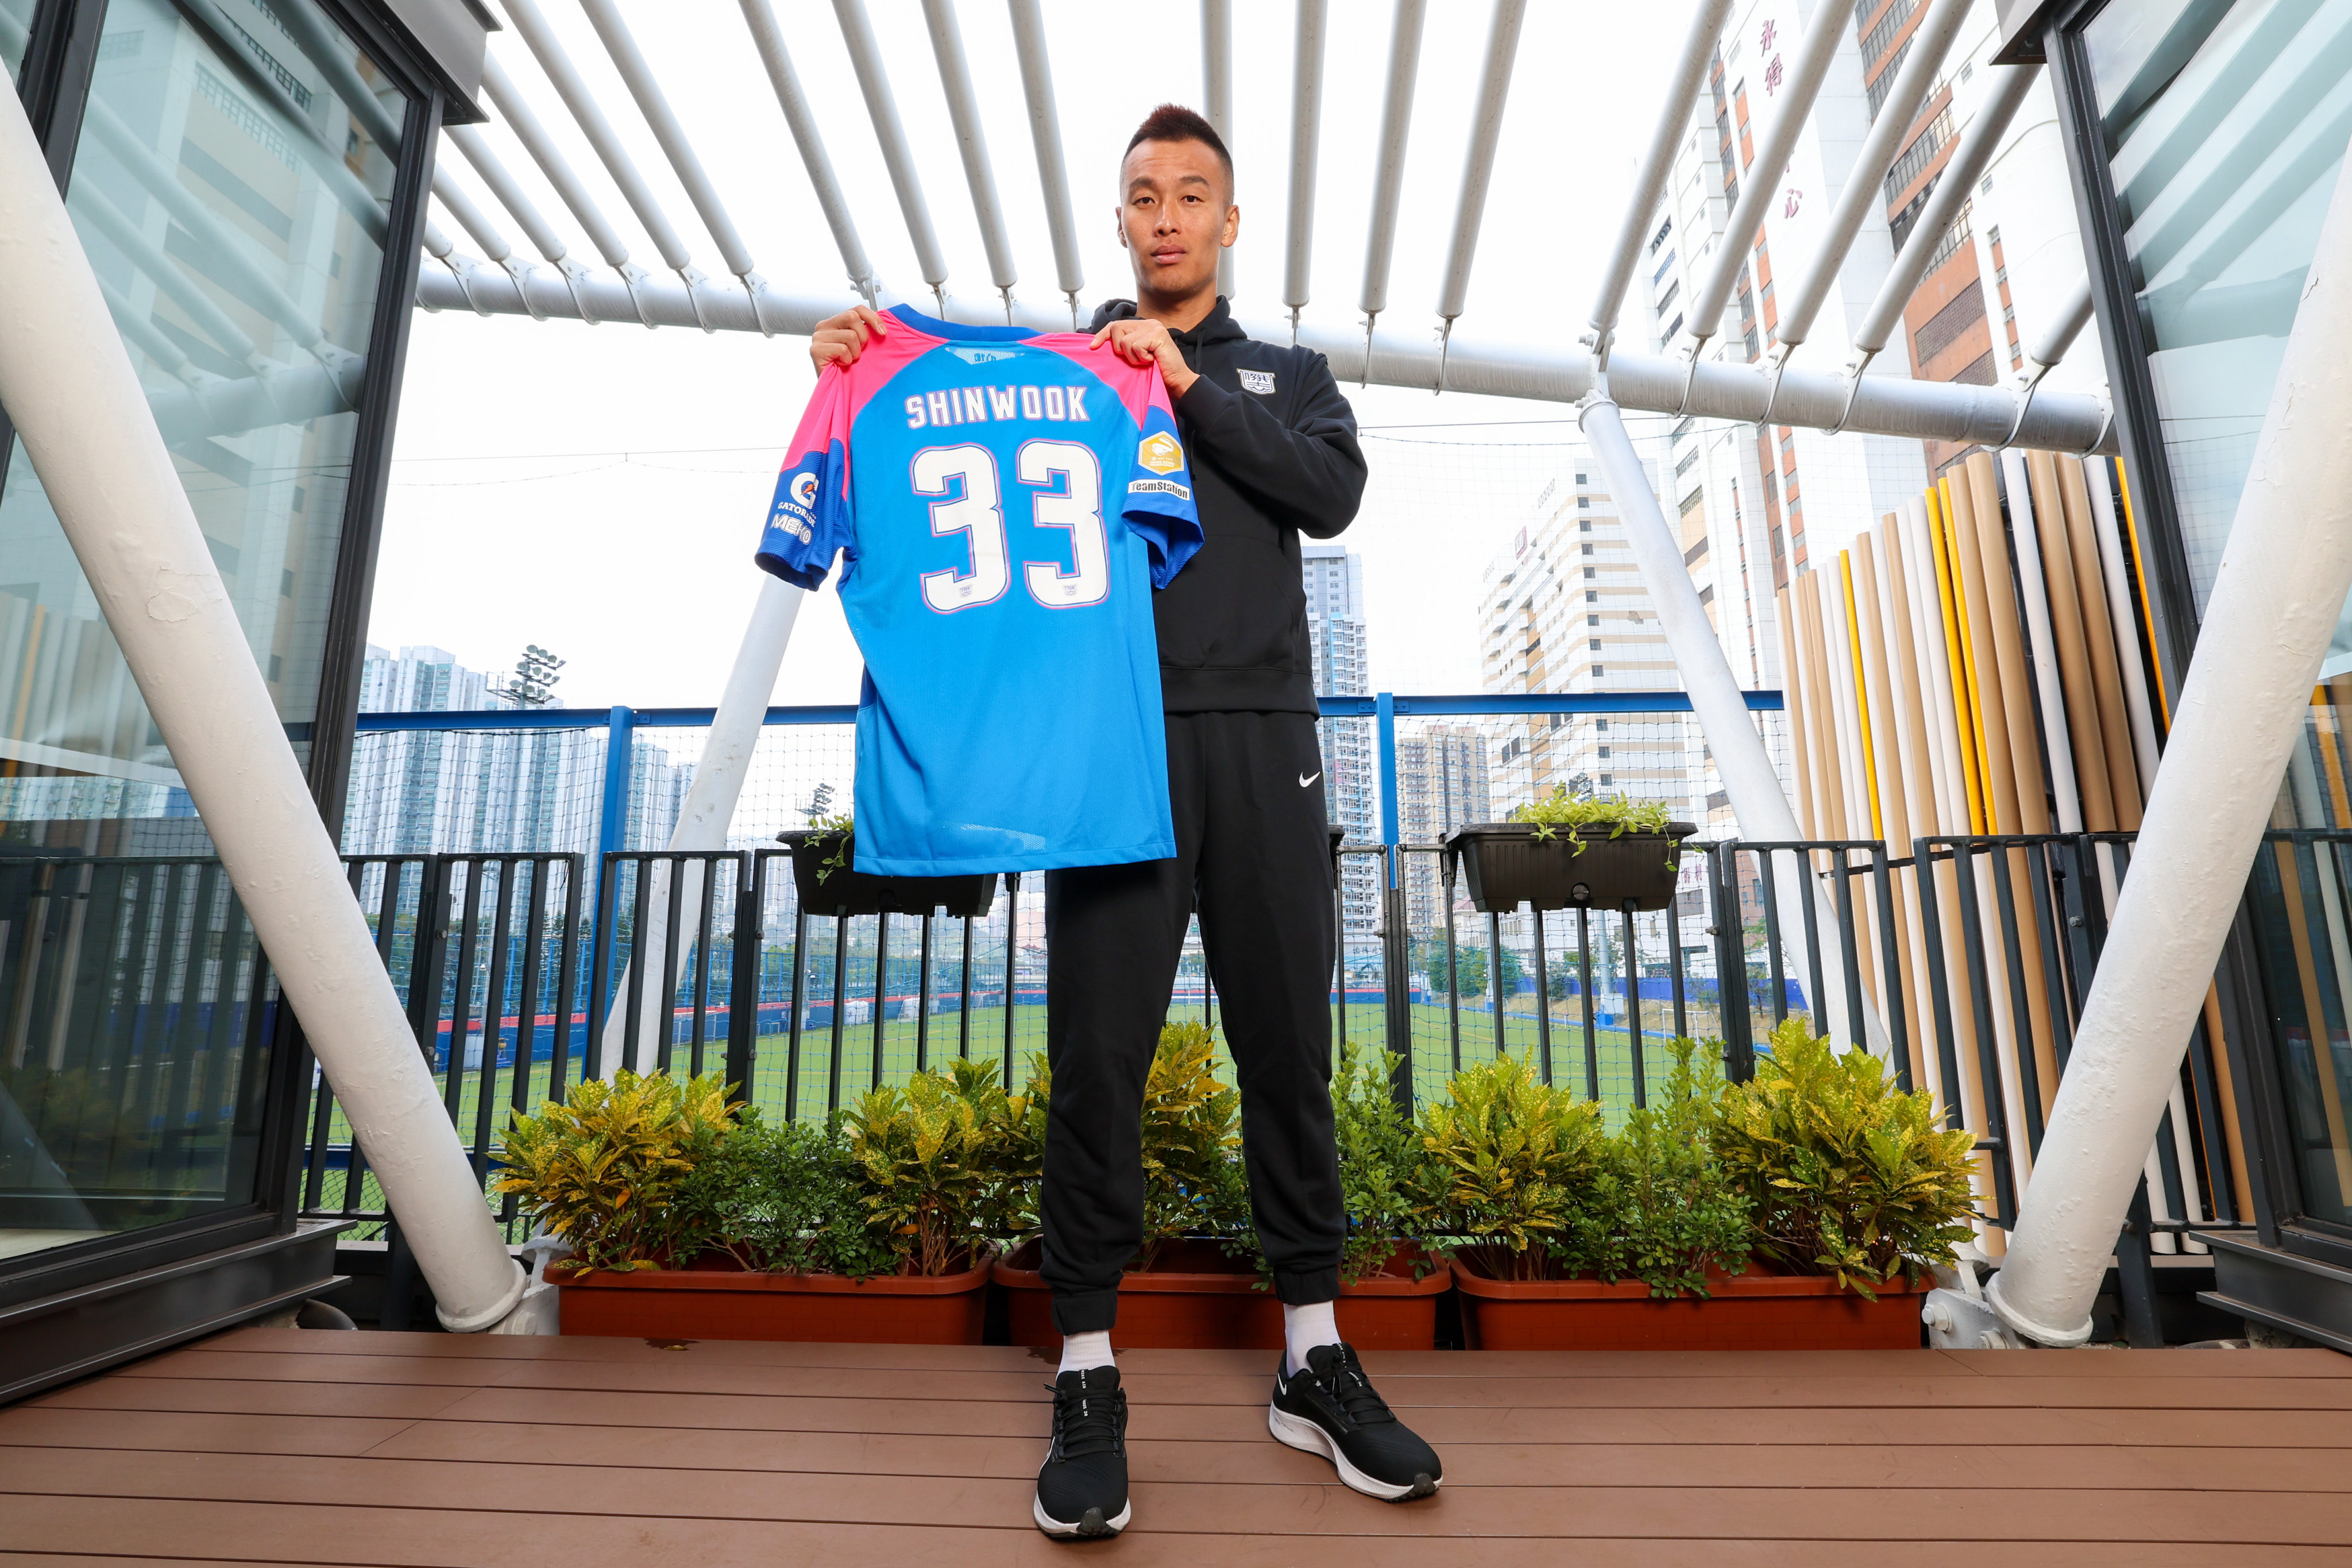 Kim Shin-wook with his new Kitchee jersey. Photo: Handout